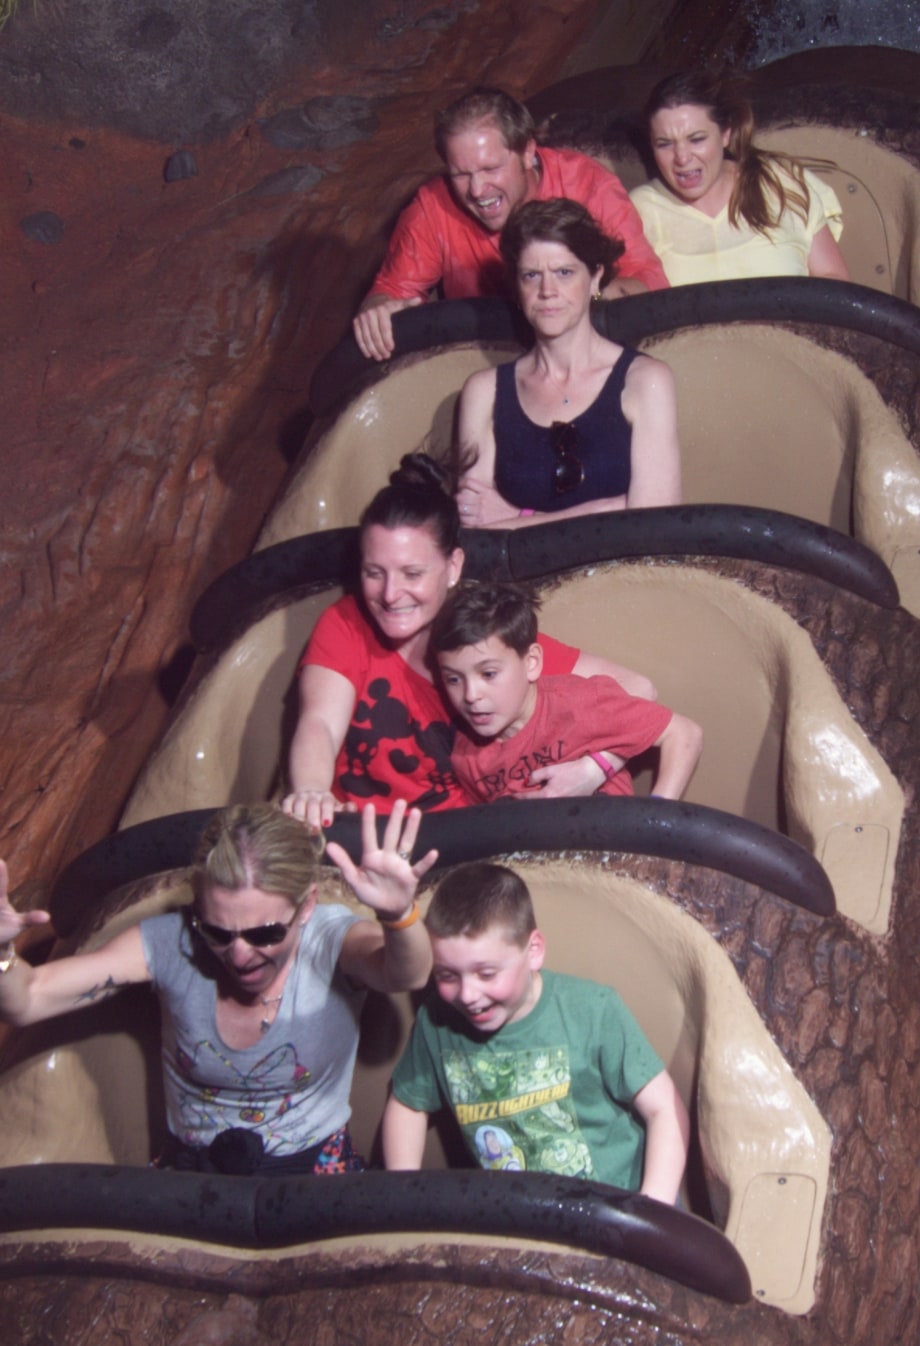 angry-splash-mountain-lady-1-7795f67d-3319-453a-89a6-708fdd4a5d8f